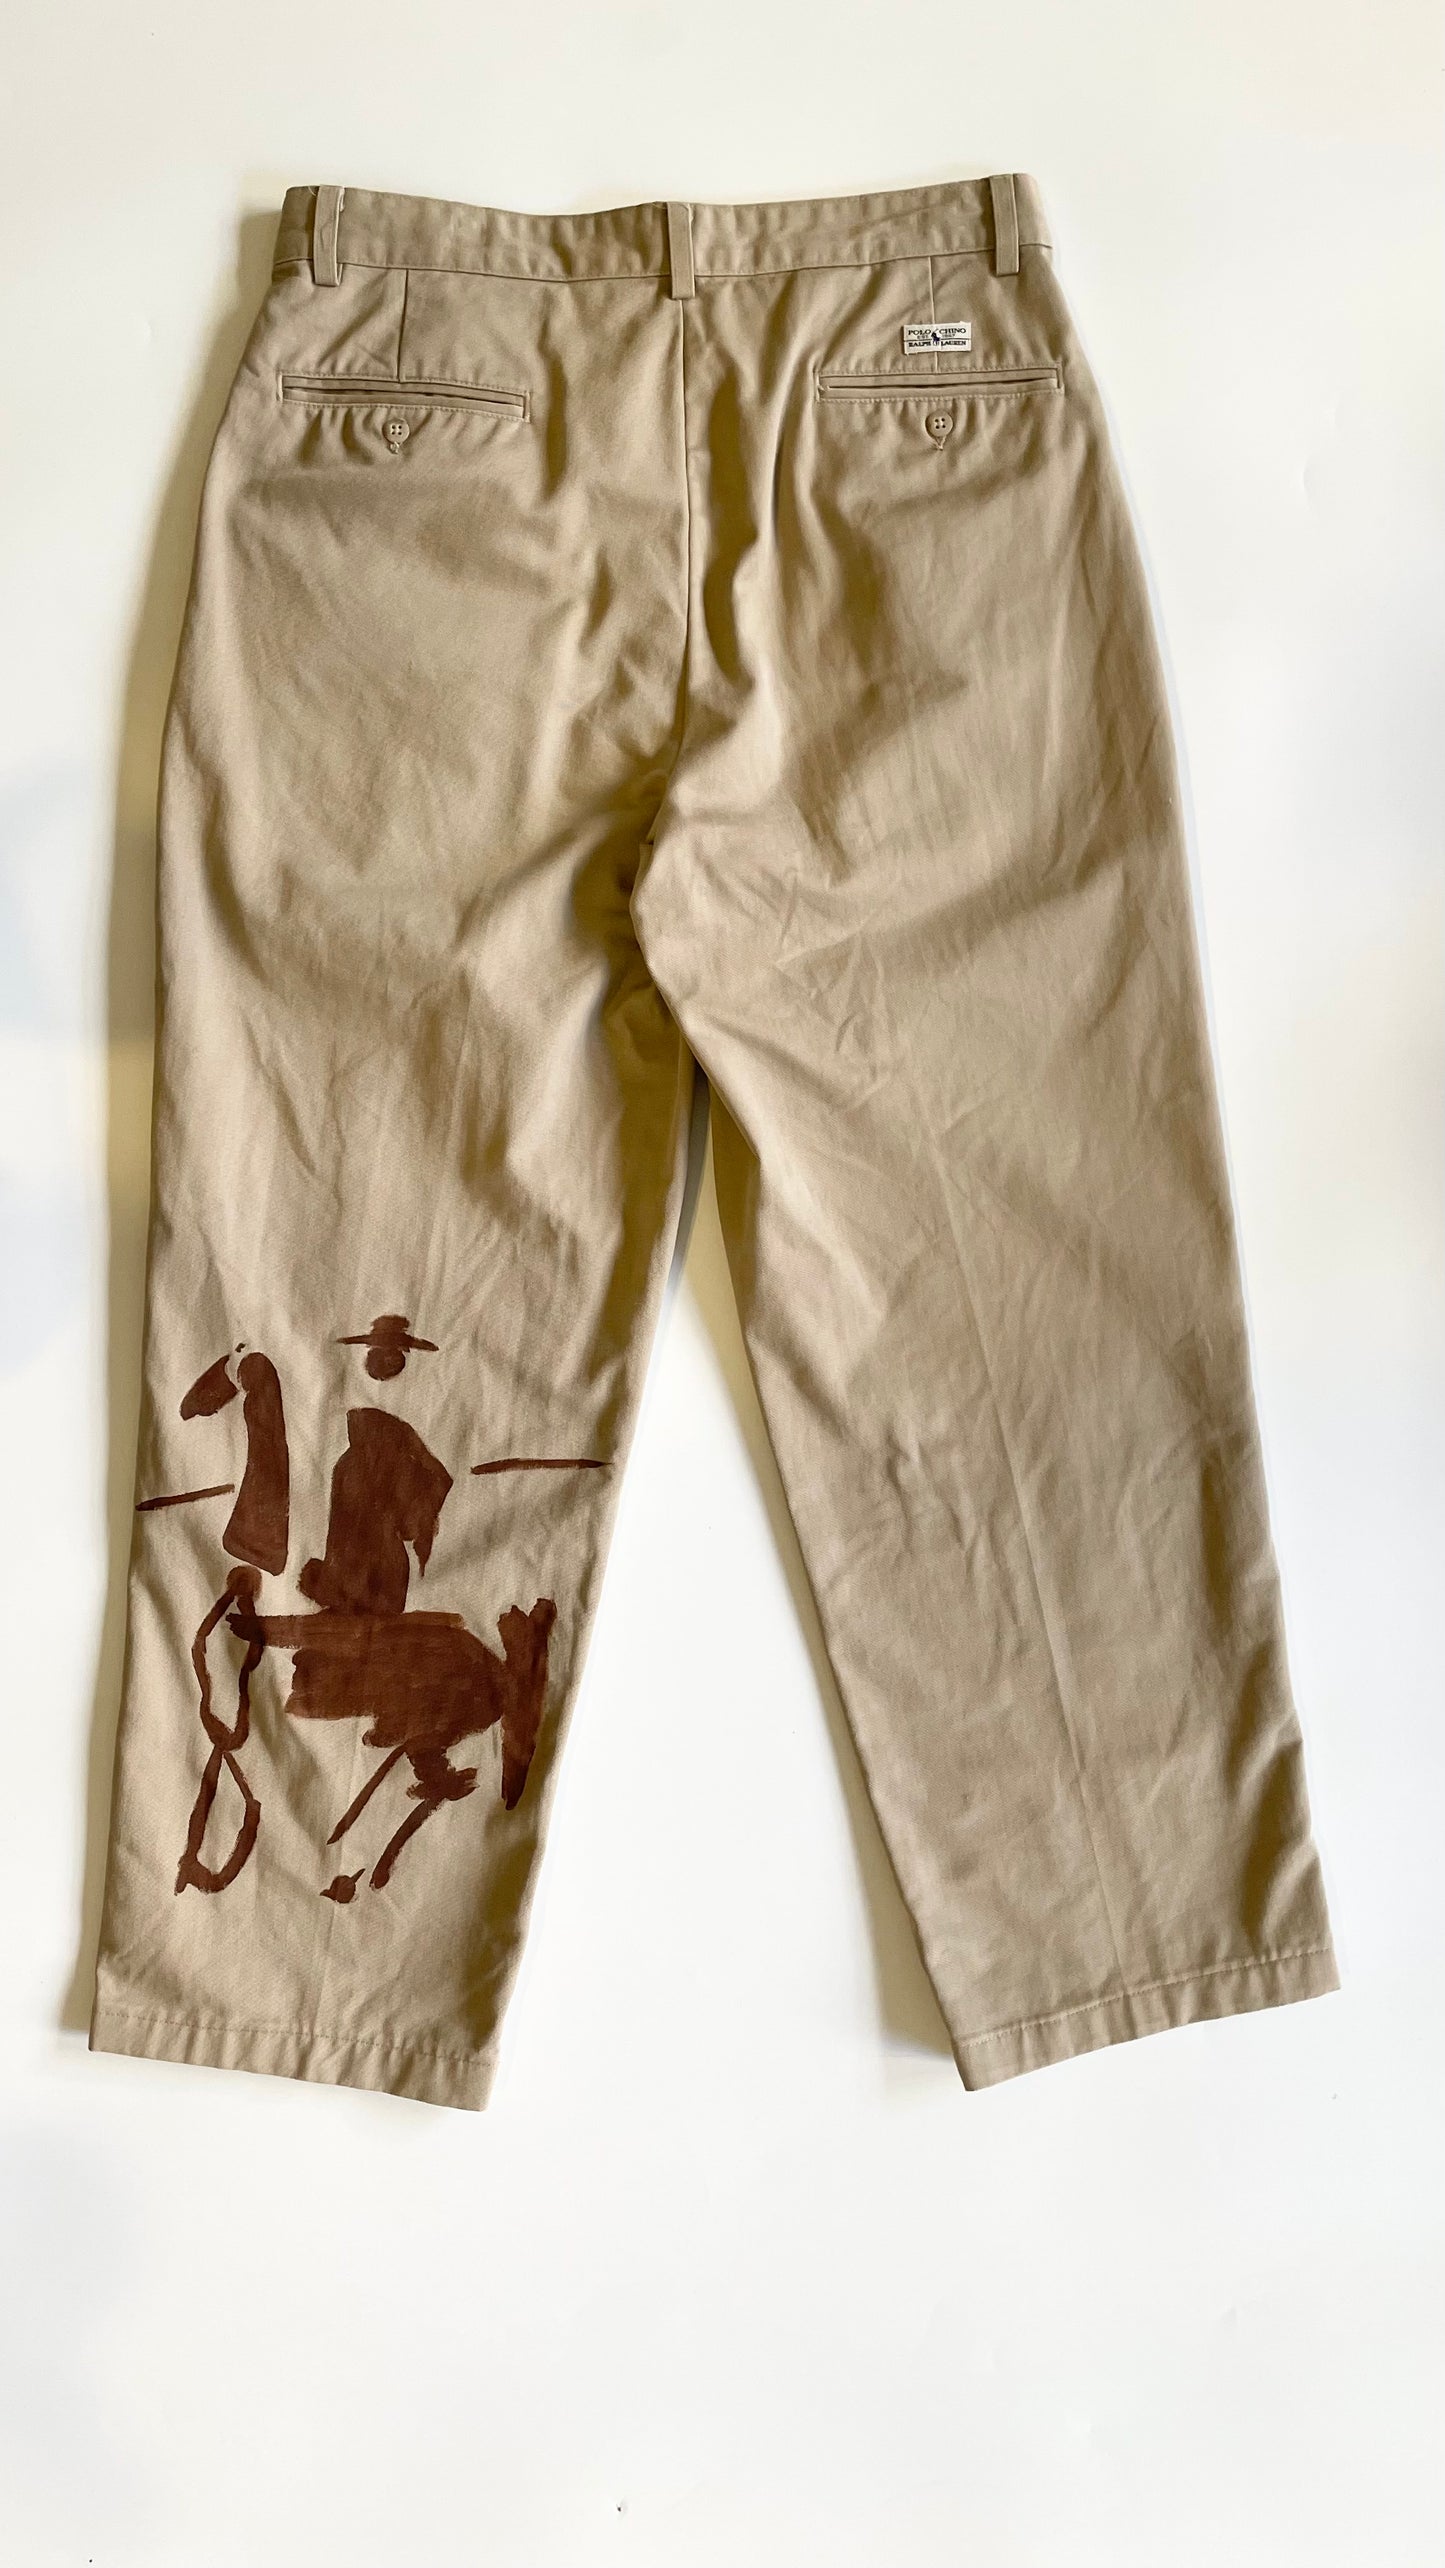 Repurposed trousers - Picasso 1 - Size 33 x 28